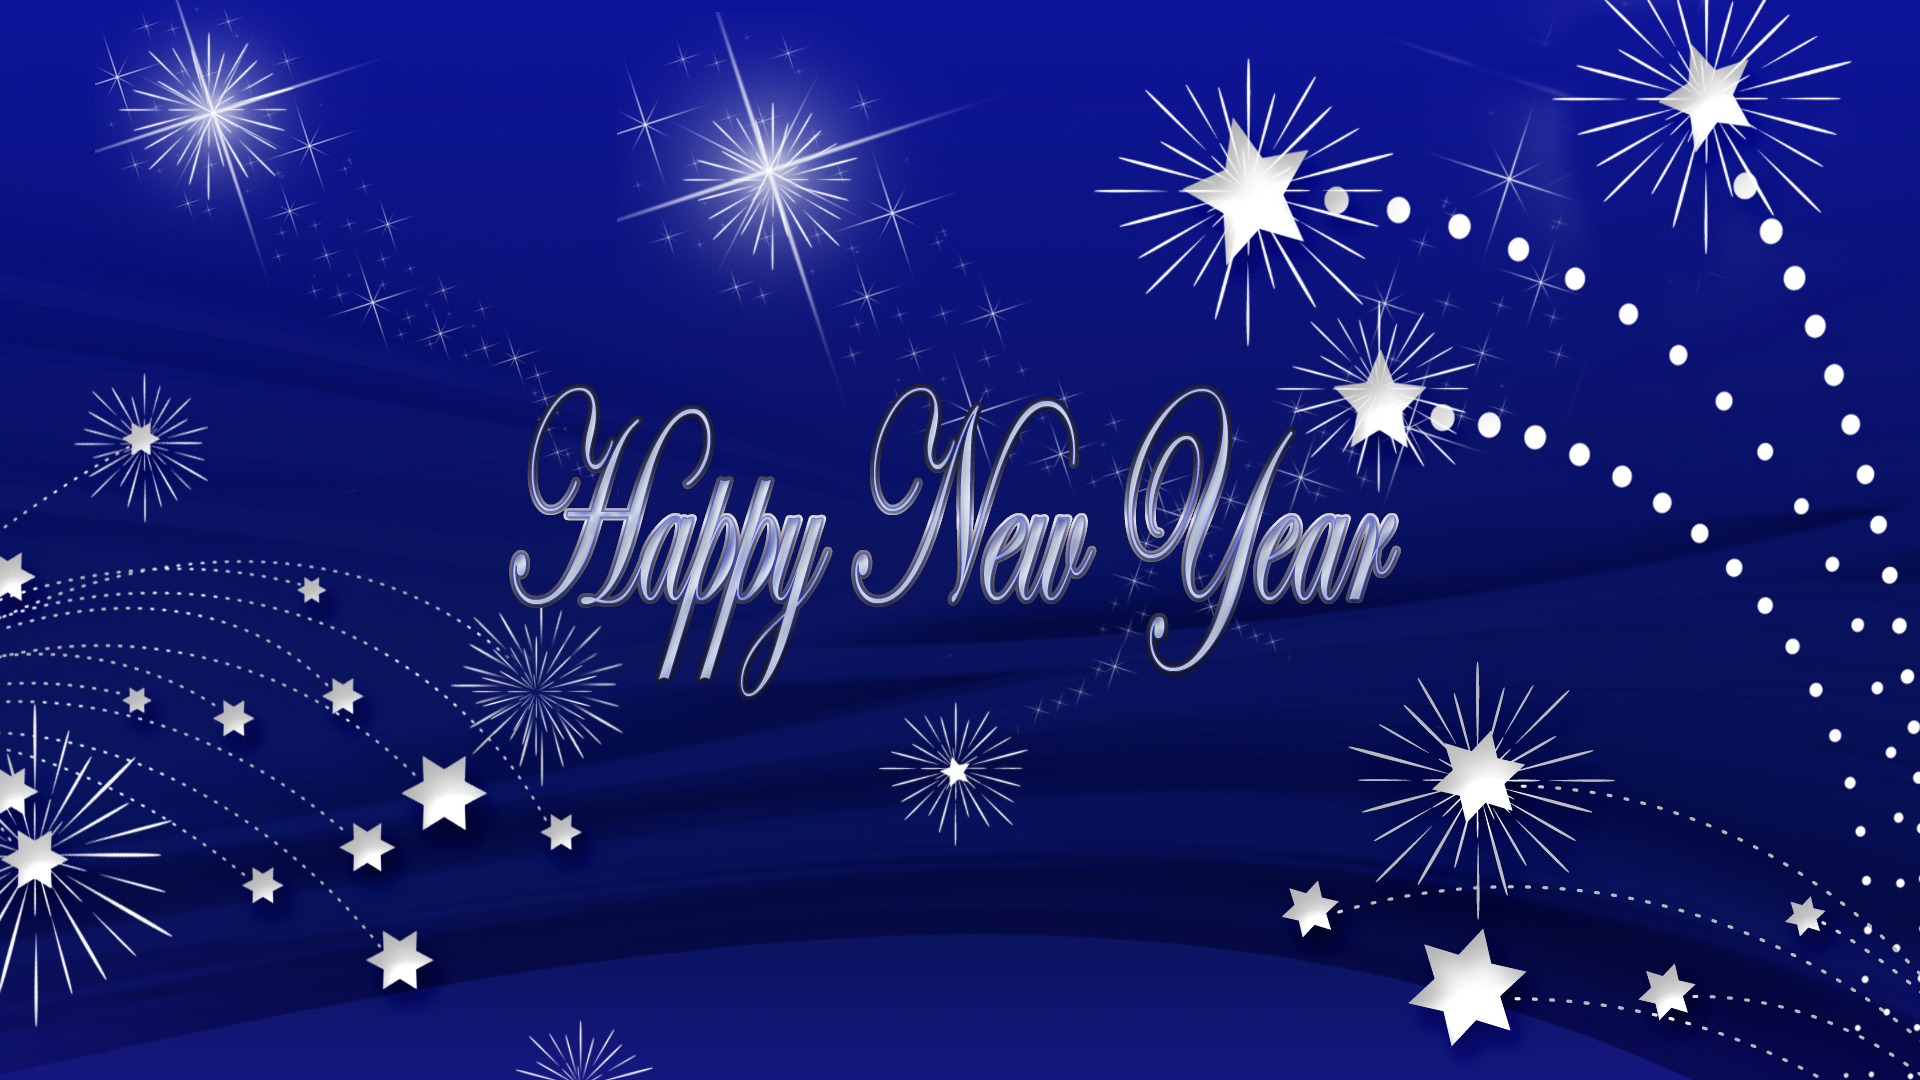 Happy New Year Images HD free download 